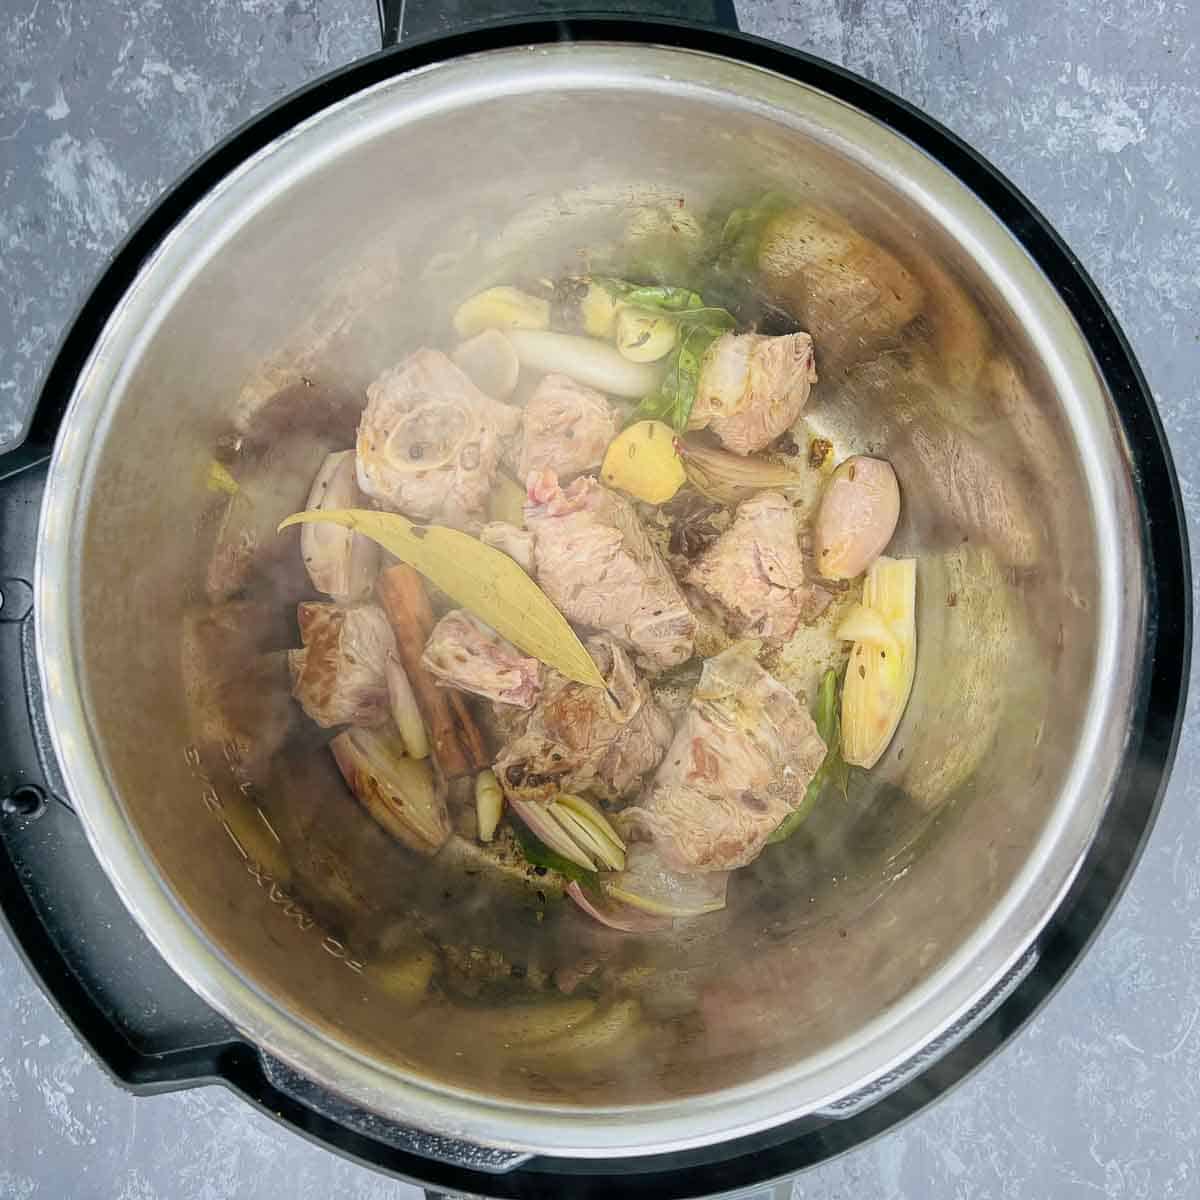 Step showing the browning of goat meat in the Instant Pot.